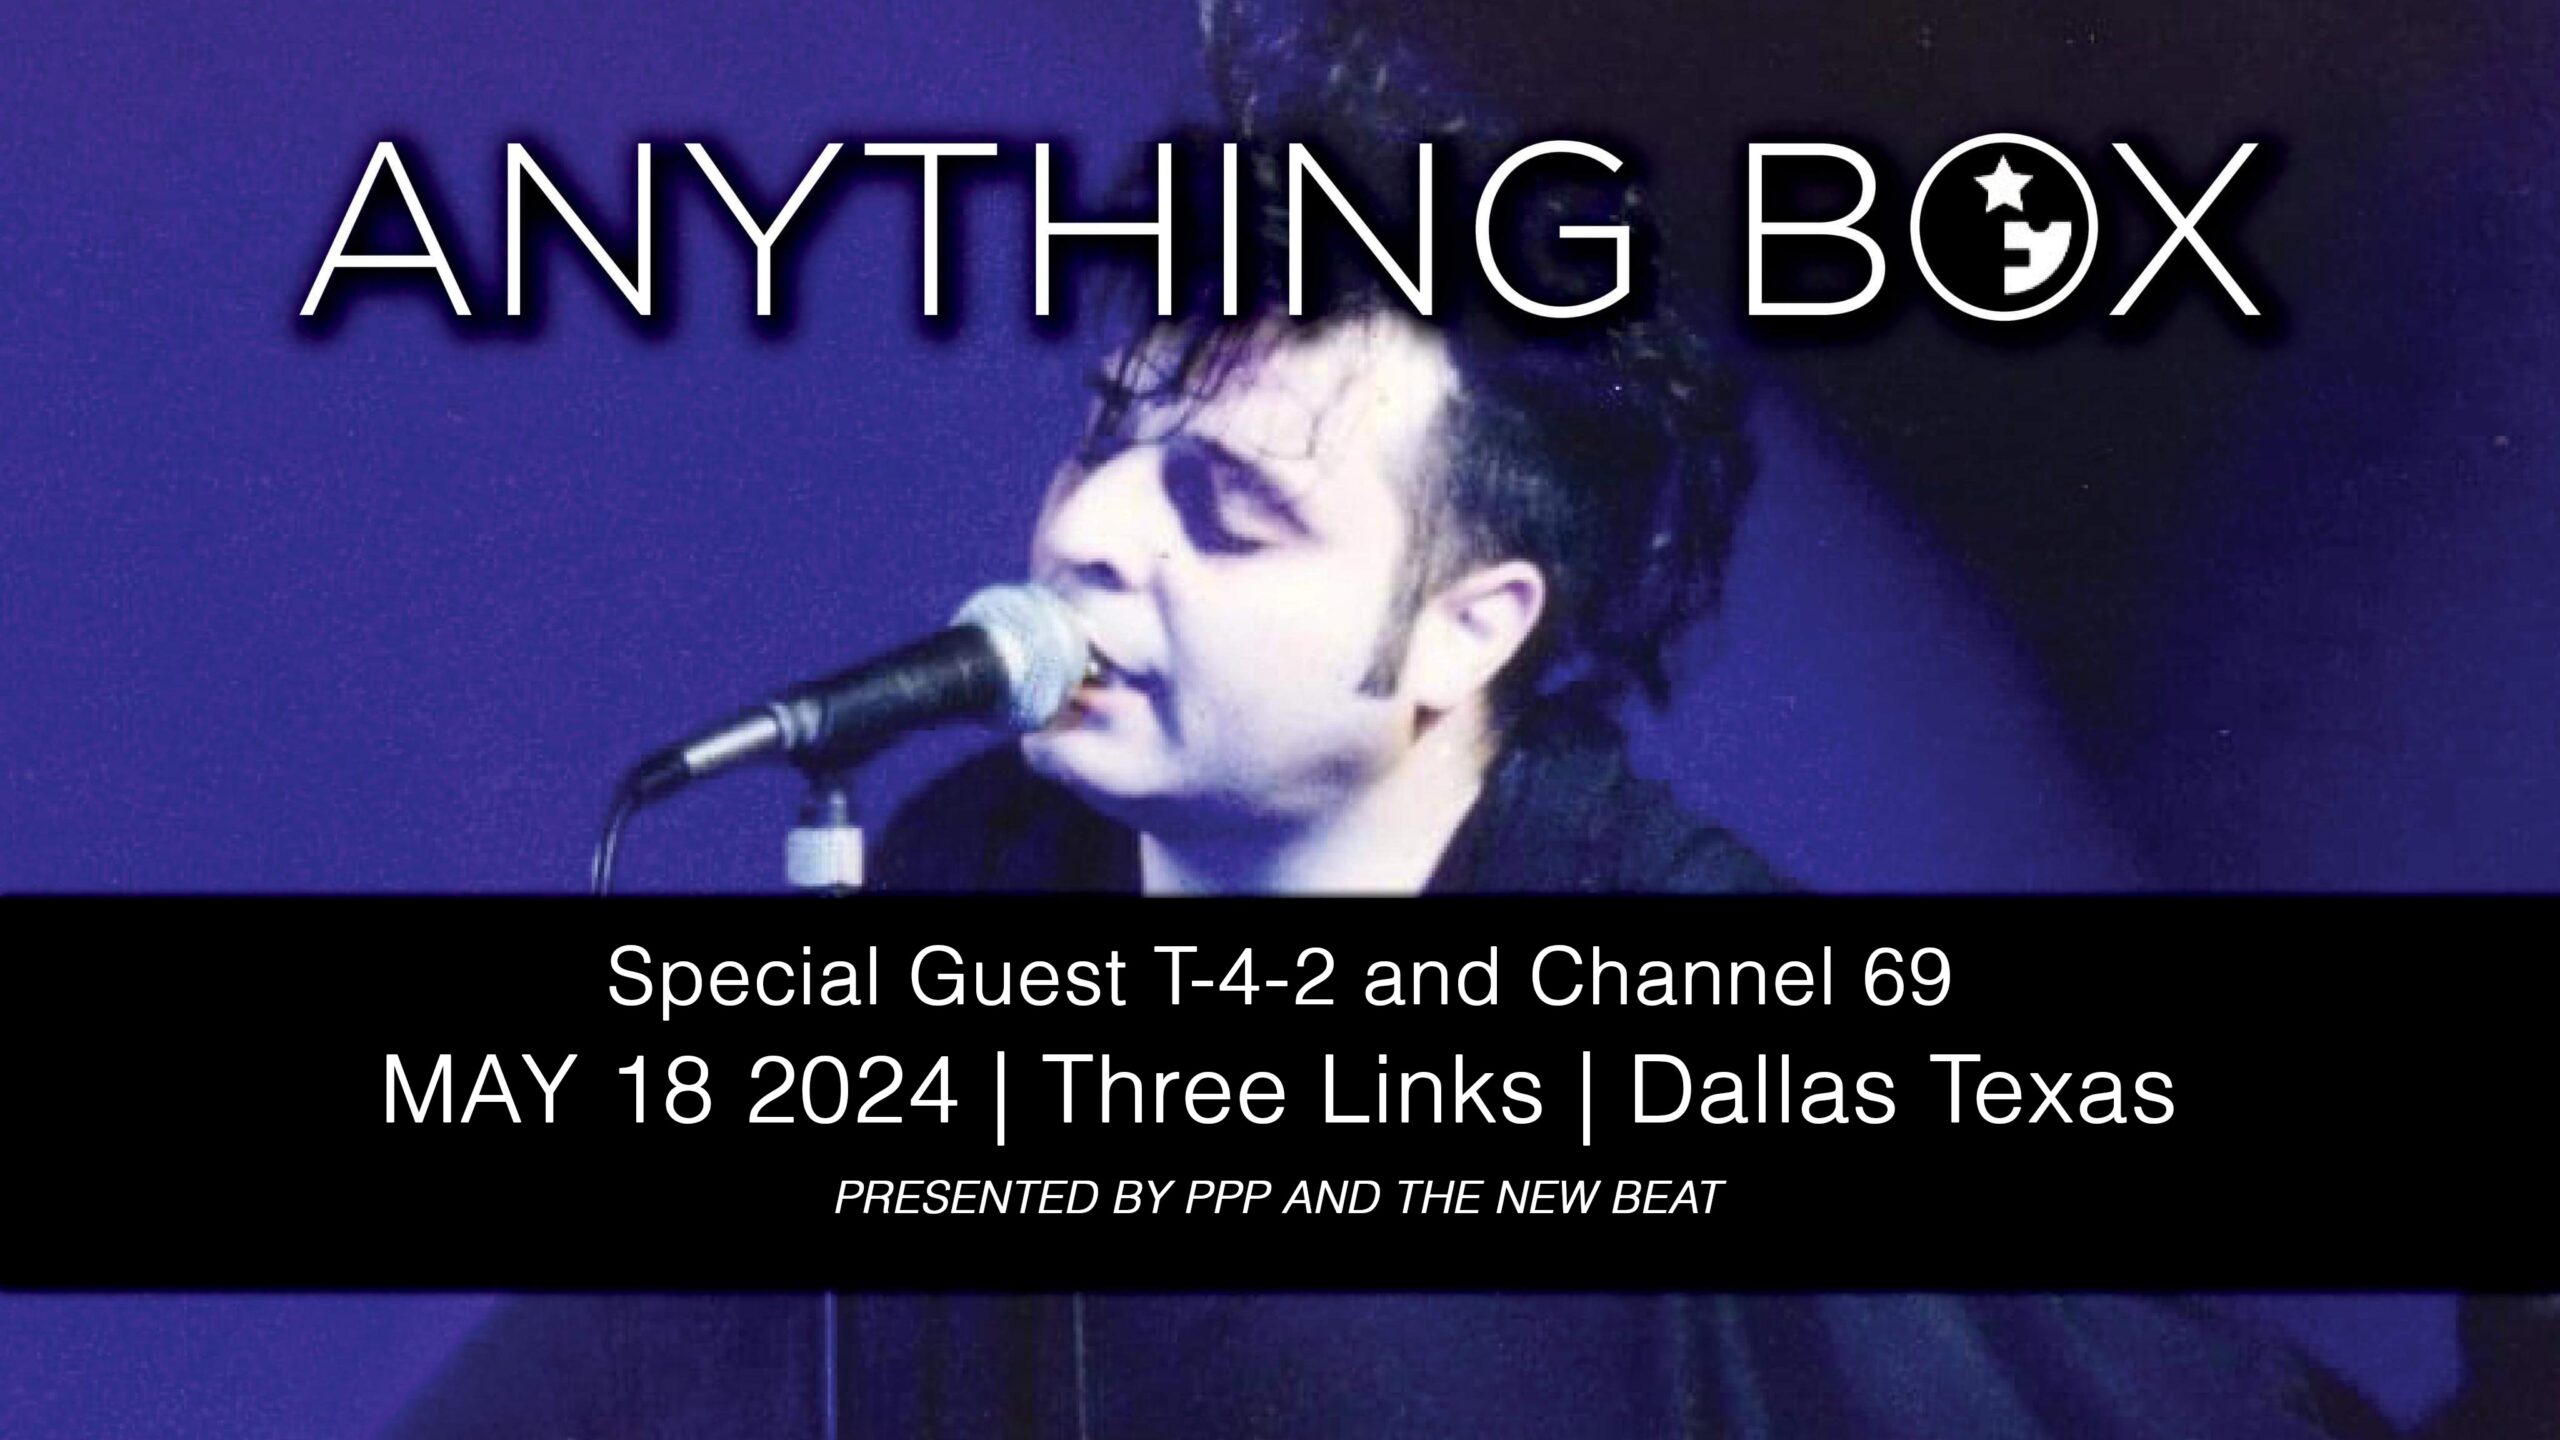 Anything Box + T-4-2 + Channel 69 | Dallas